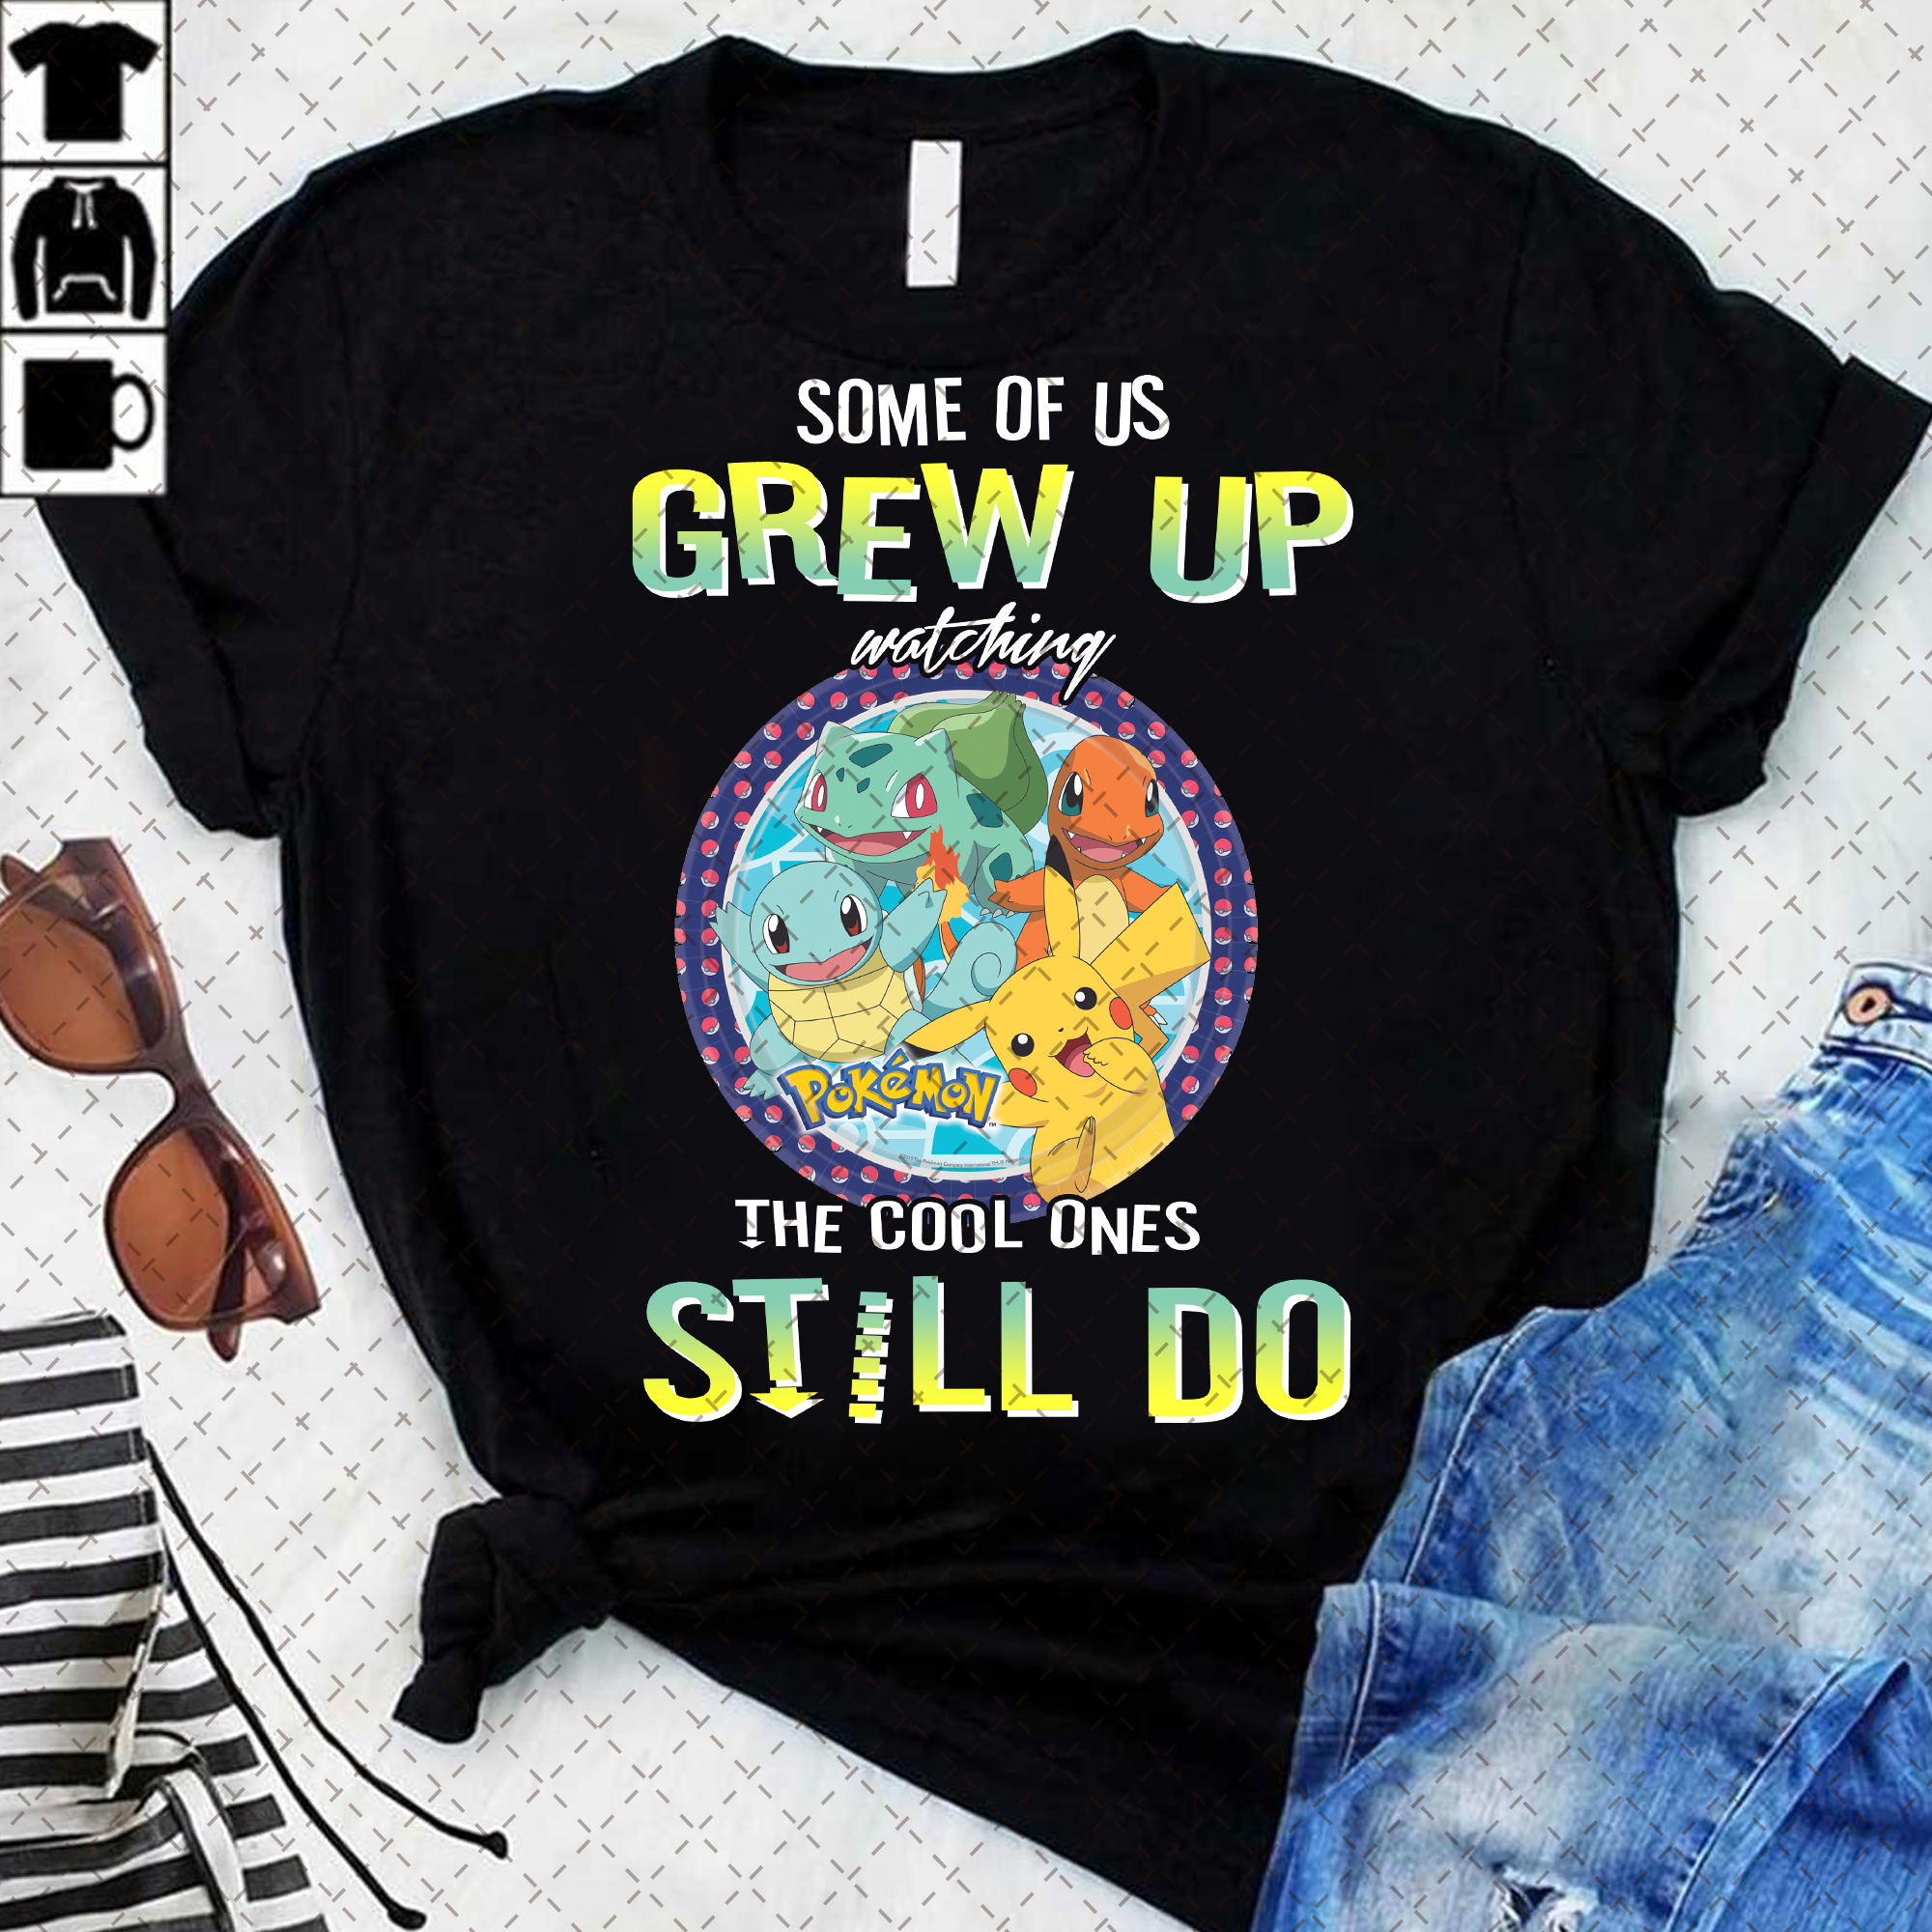 Some of us Grew up watching the cool ones still do T-Shirts, Pokemon Shirts, Personalized Gifts